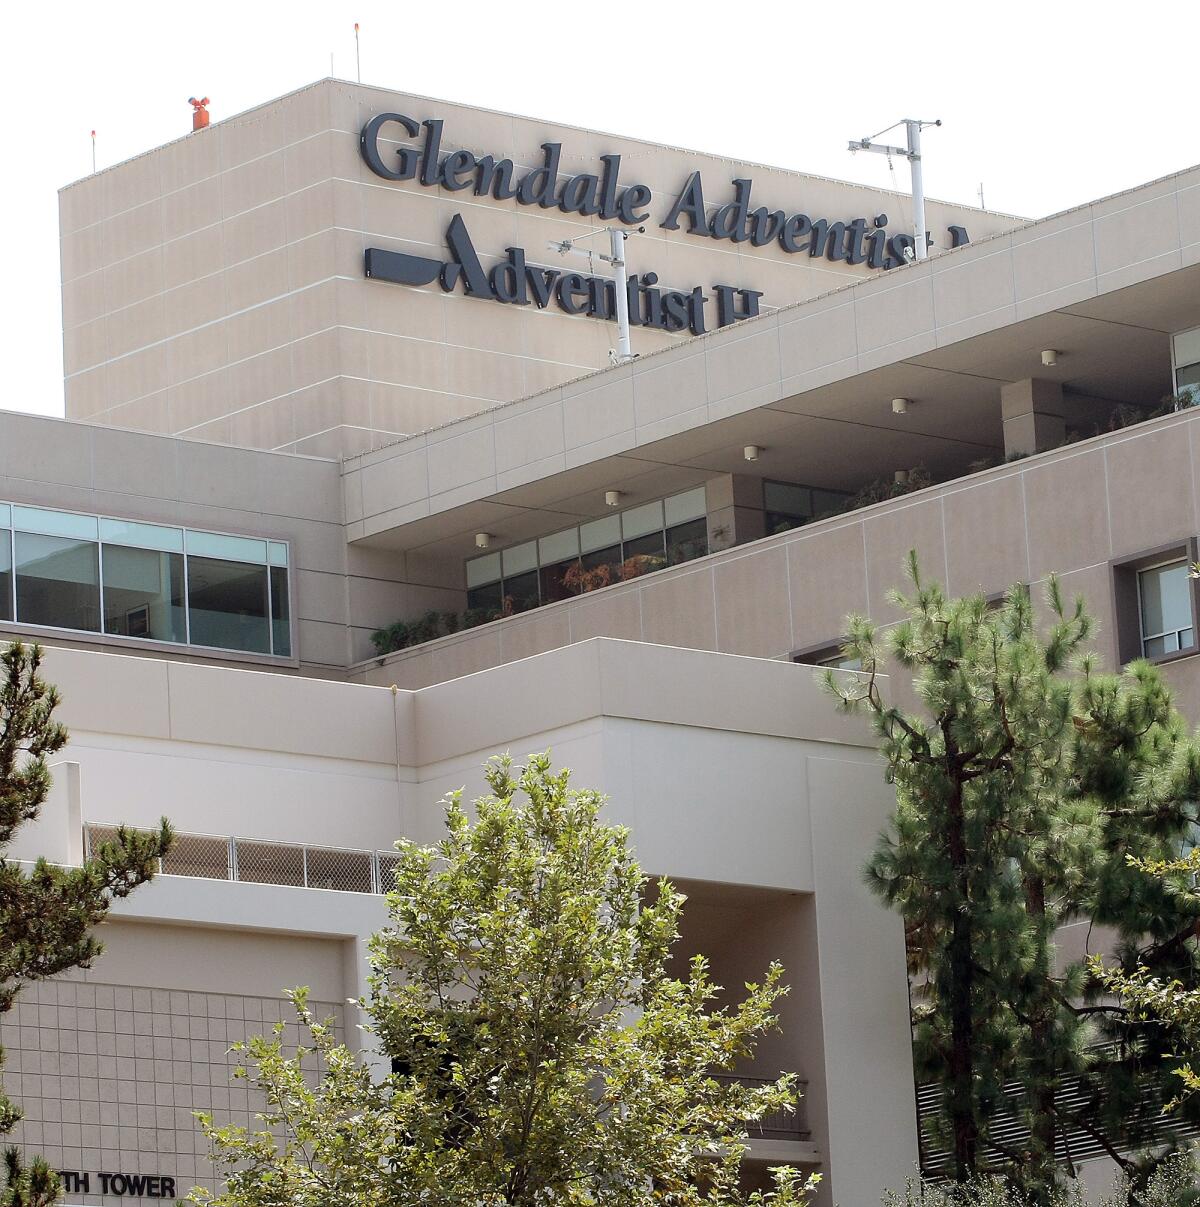 Glendale Adventist Medical Center, photographed on Friday, August 21, 2015.